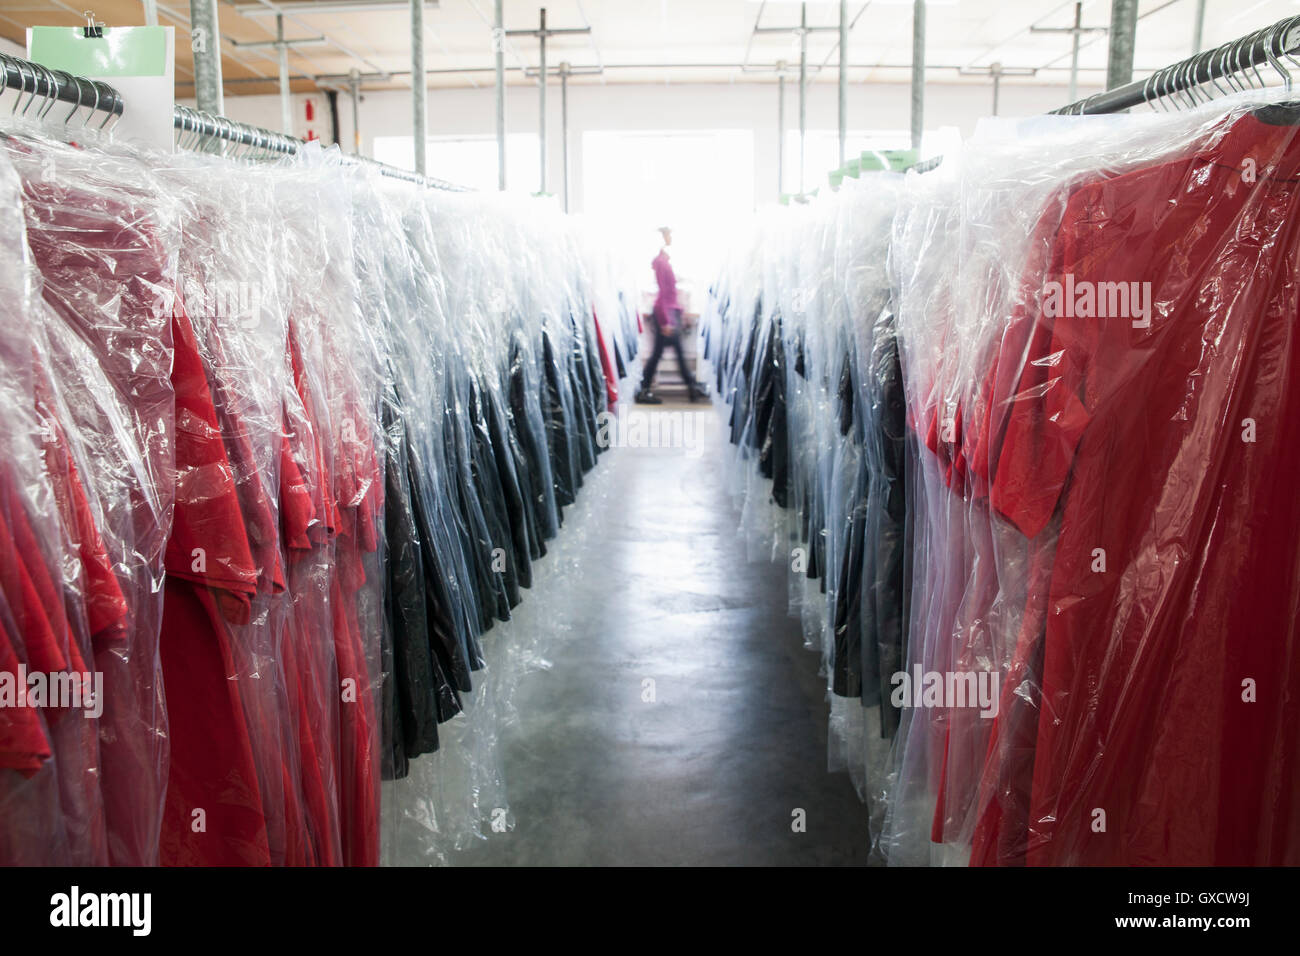 Diminishing perspective of garments on clothes rail in sewing factory Stock Photo